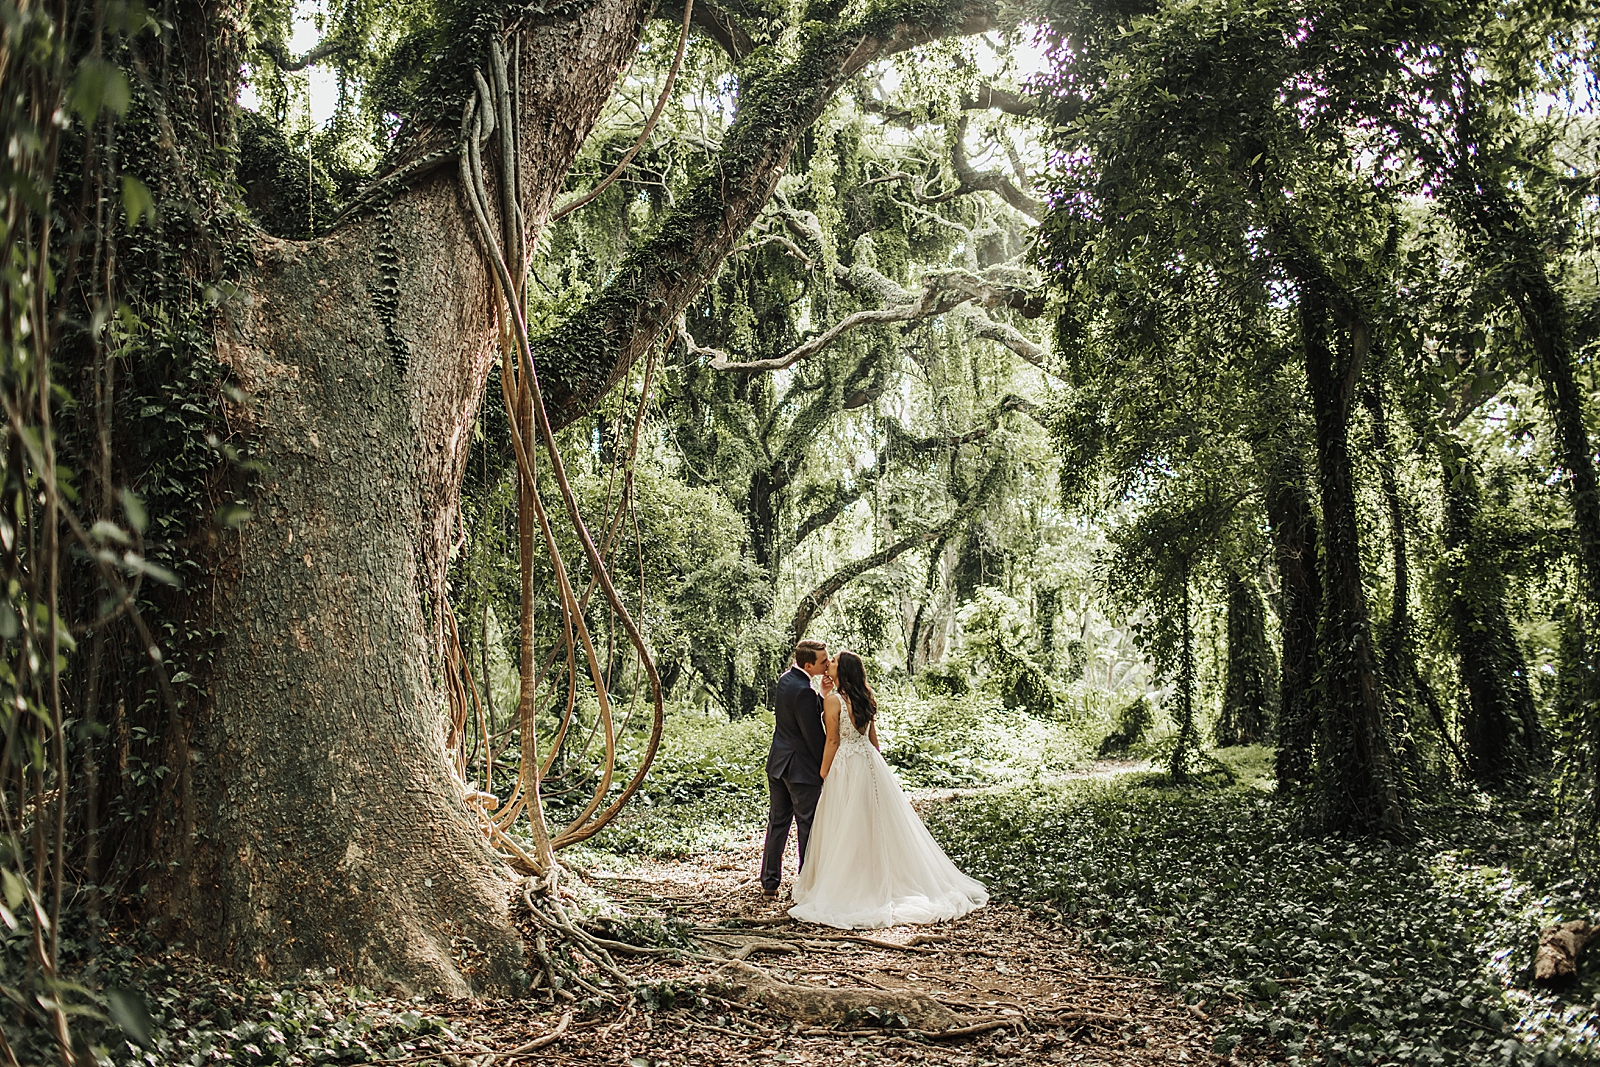 Bride and Groom kissing in green forest by large tree